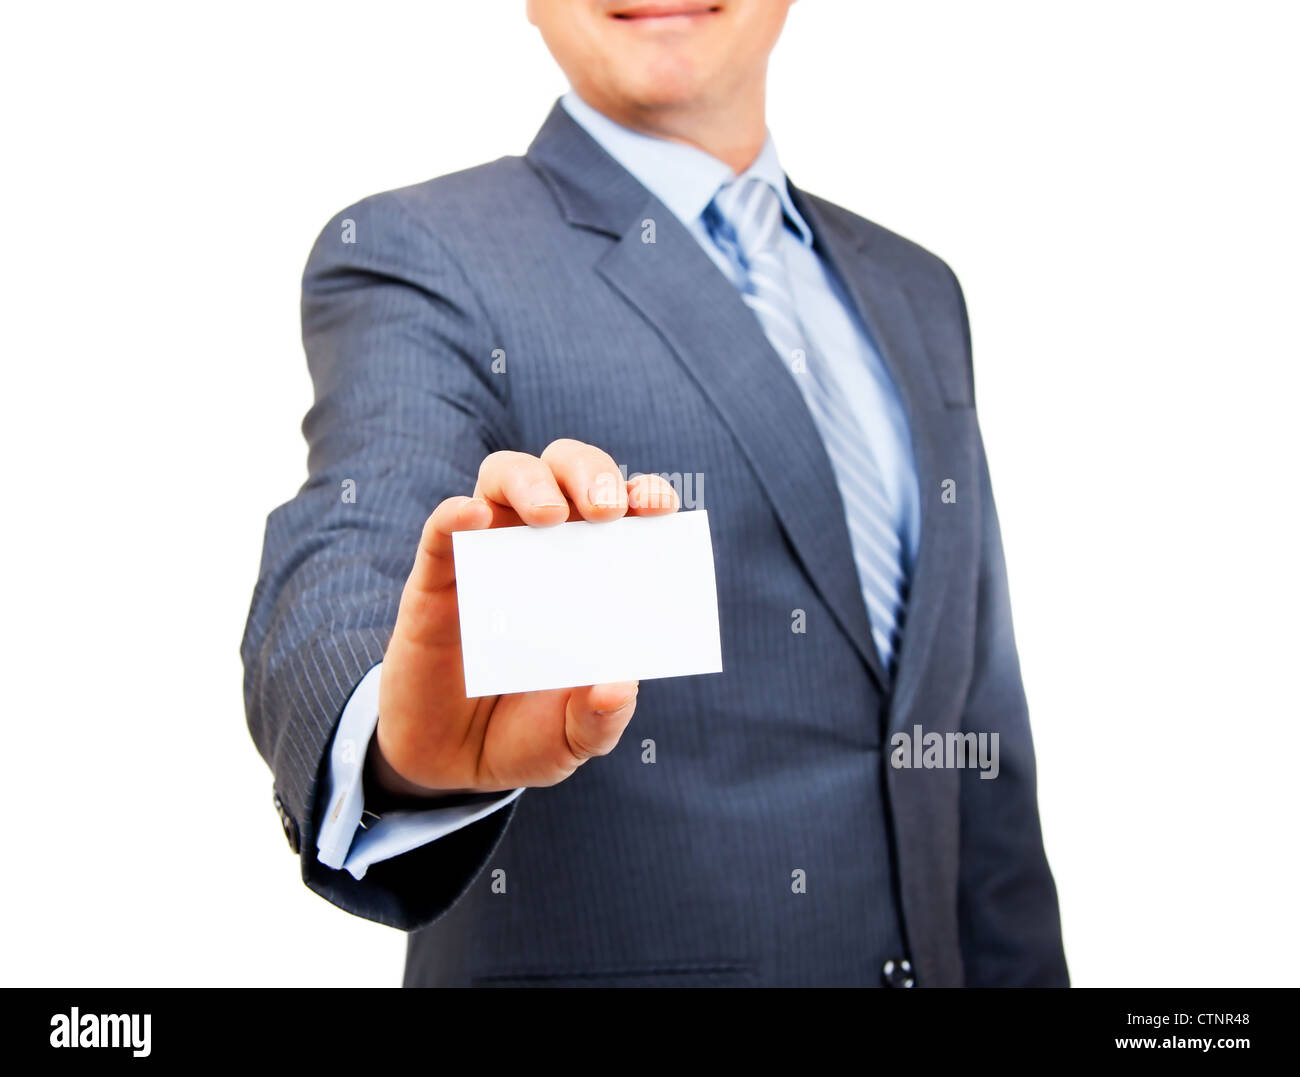 Business person in suit holding out blank white copy space card on isolated background. Focus on card. Stock Photo